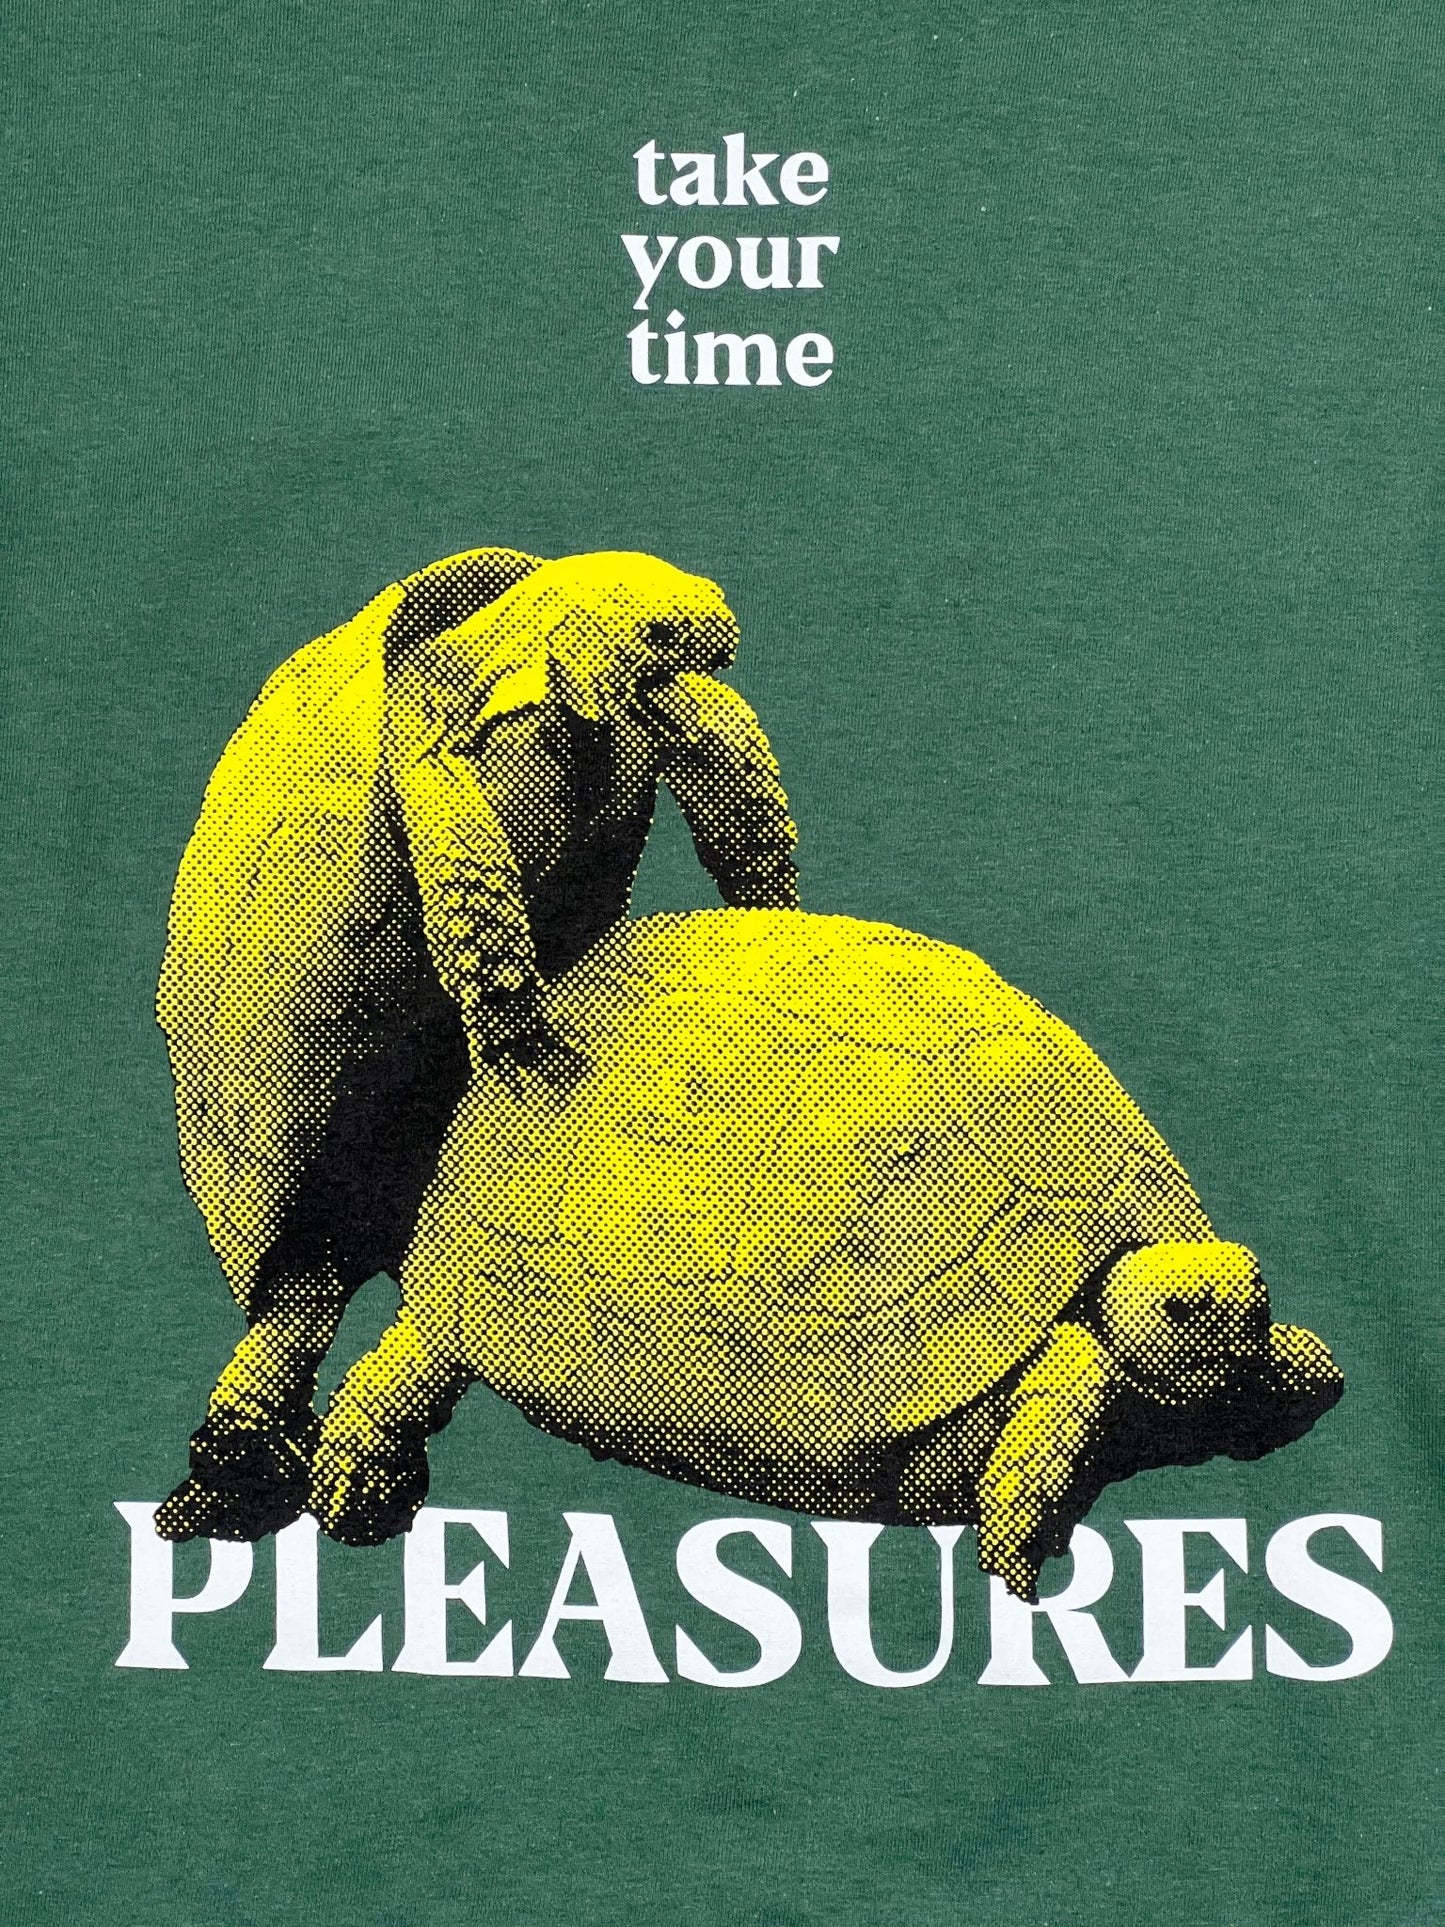 Take your cotton PLEASURES YOUR TIME graphic t-shirt.